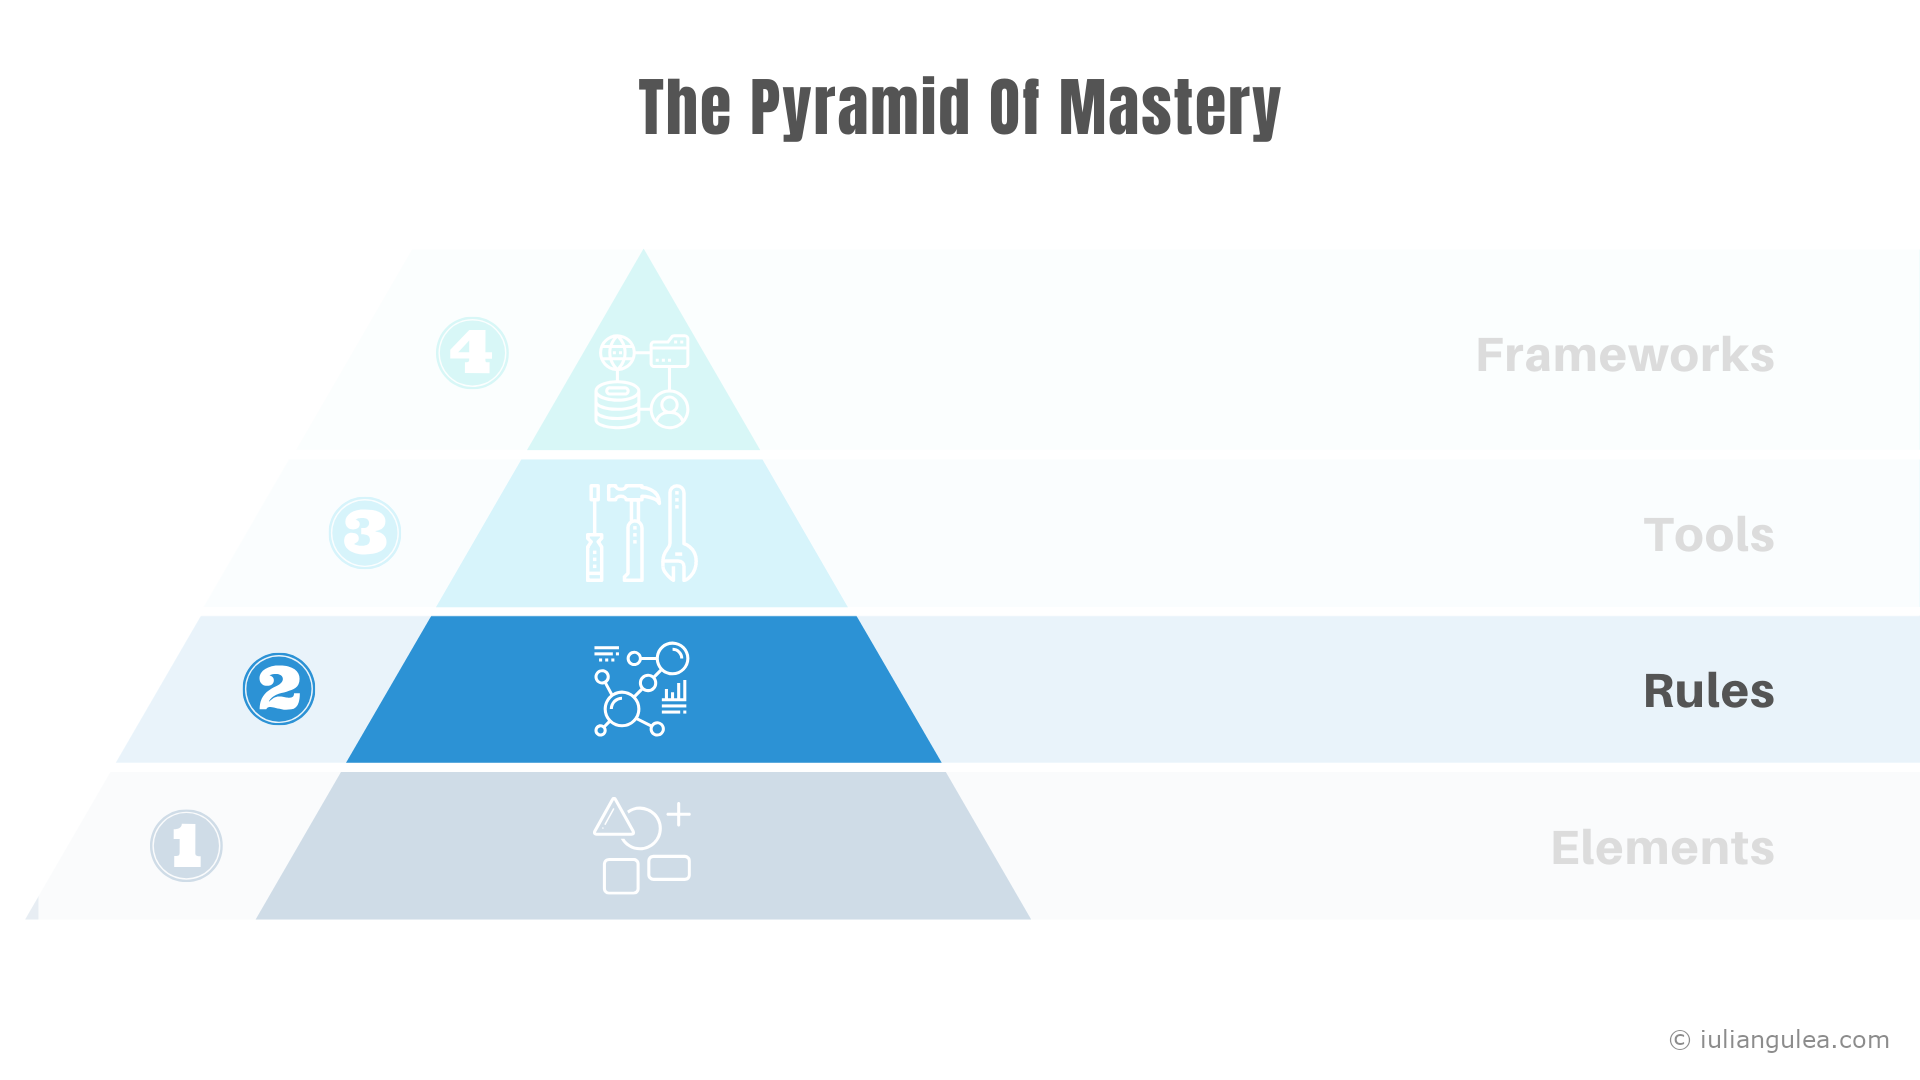 The Pyramid Of Mastery - The Rules